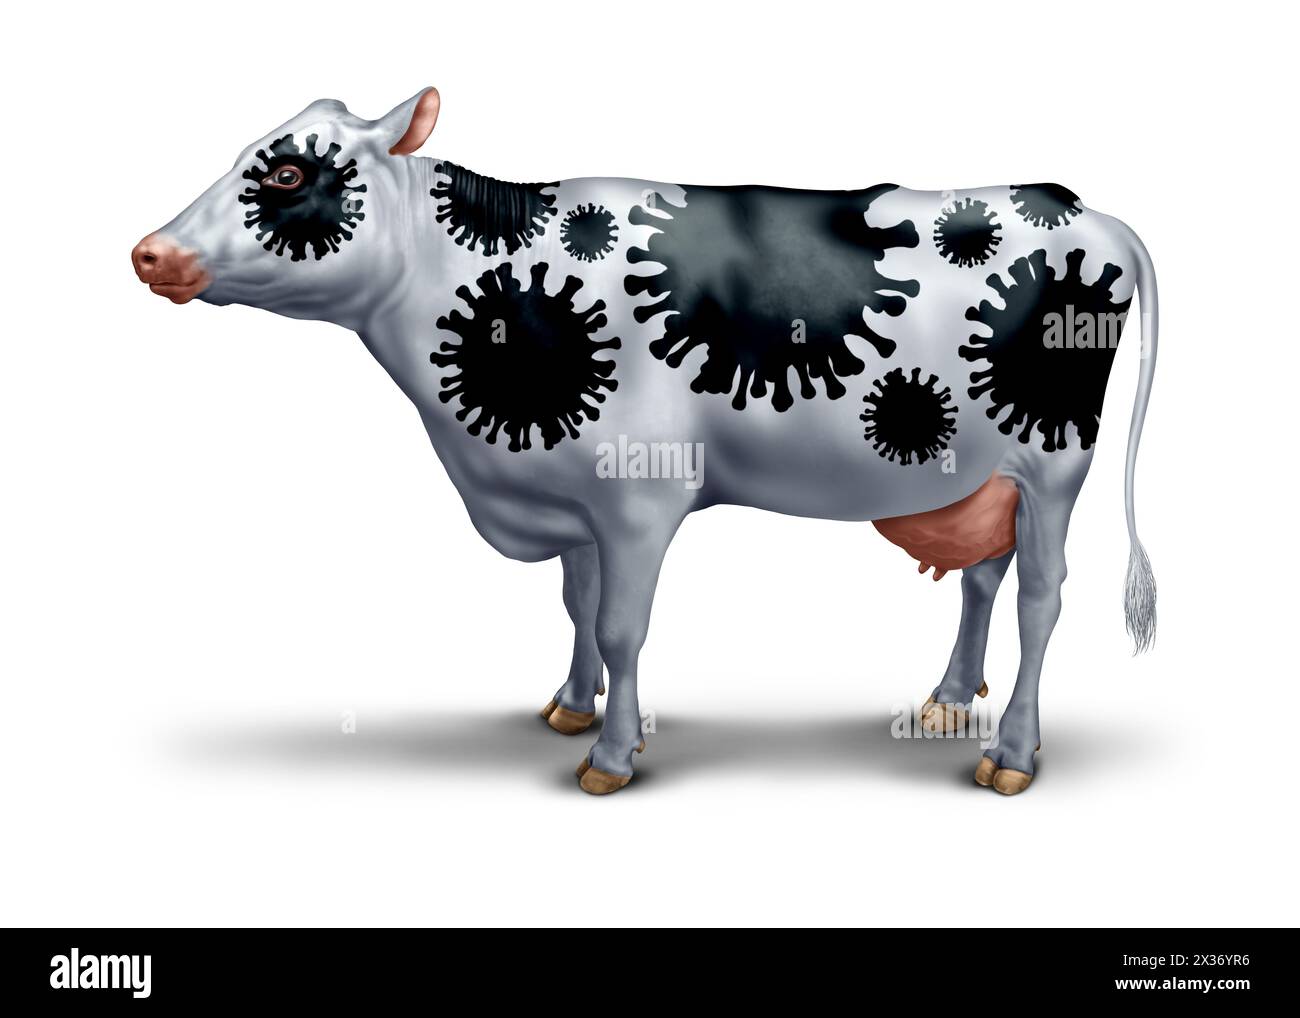 Cow Virus Outbreak as a bovine coronavirus symbol as an agricultural pathology symbol or the effects of avian or bird flu as a public health concern. Stock Photo